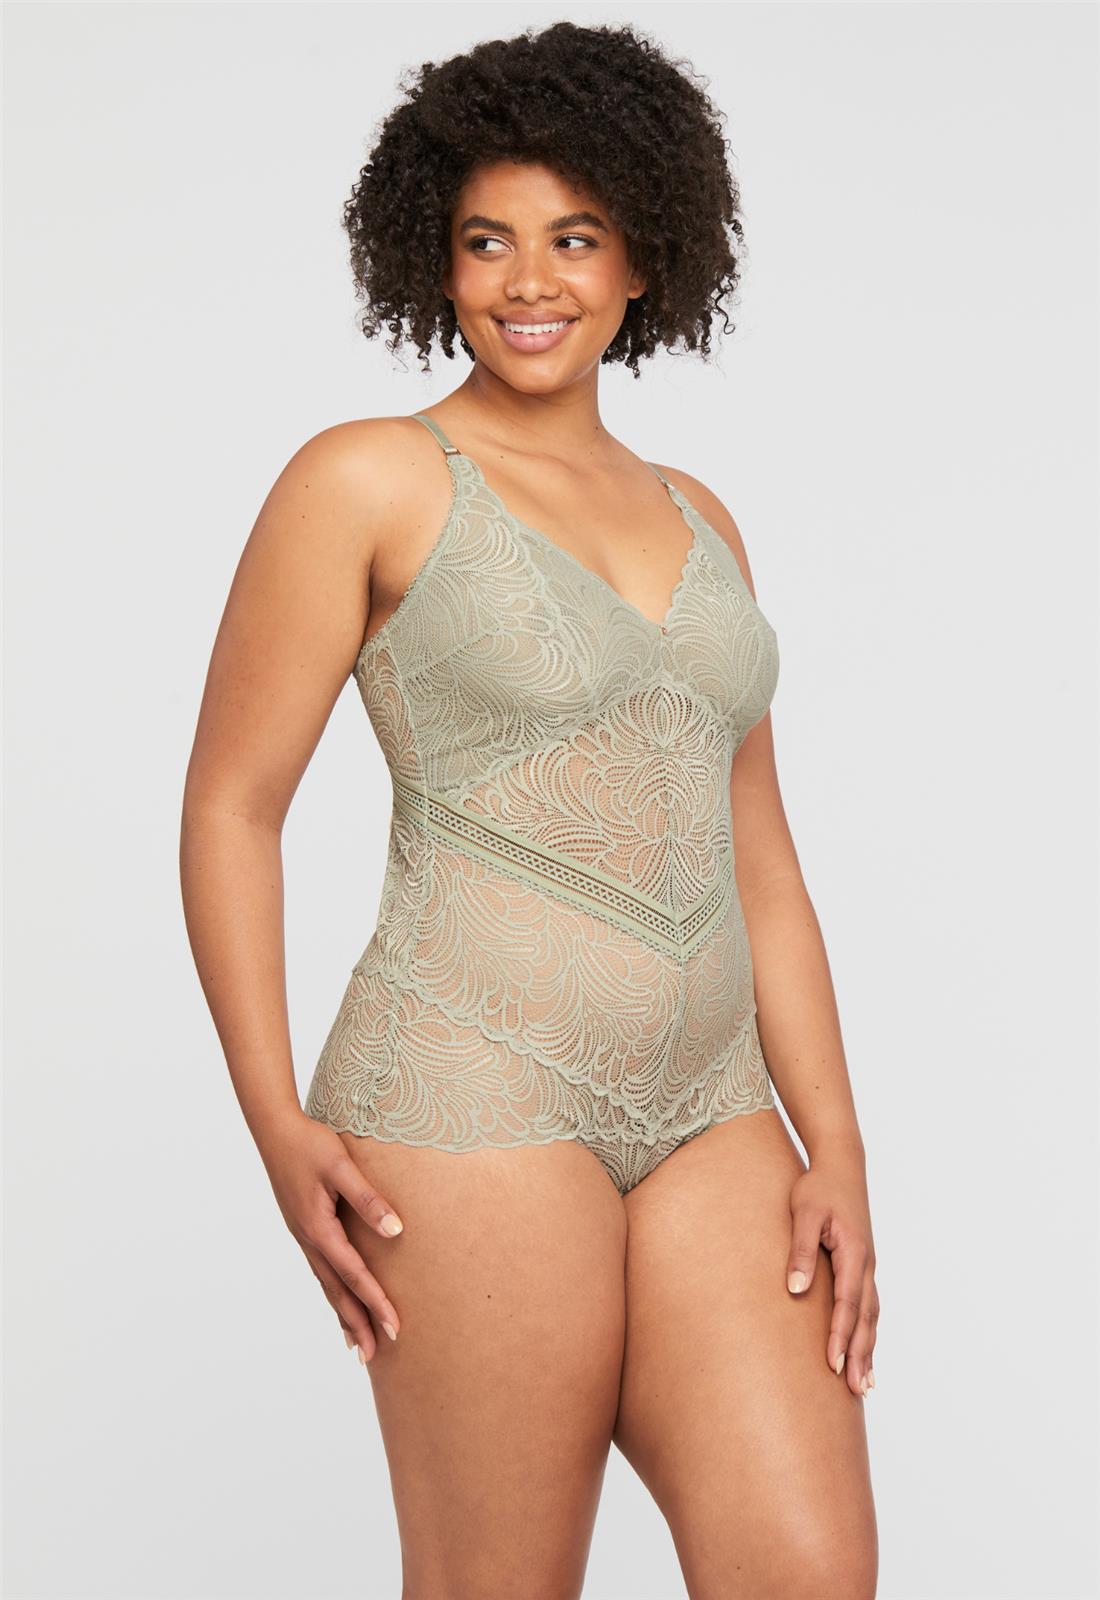 London Fog Lacey Bodysuit - Sage, worn by model, front view